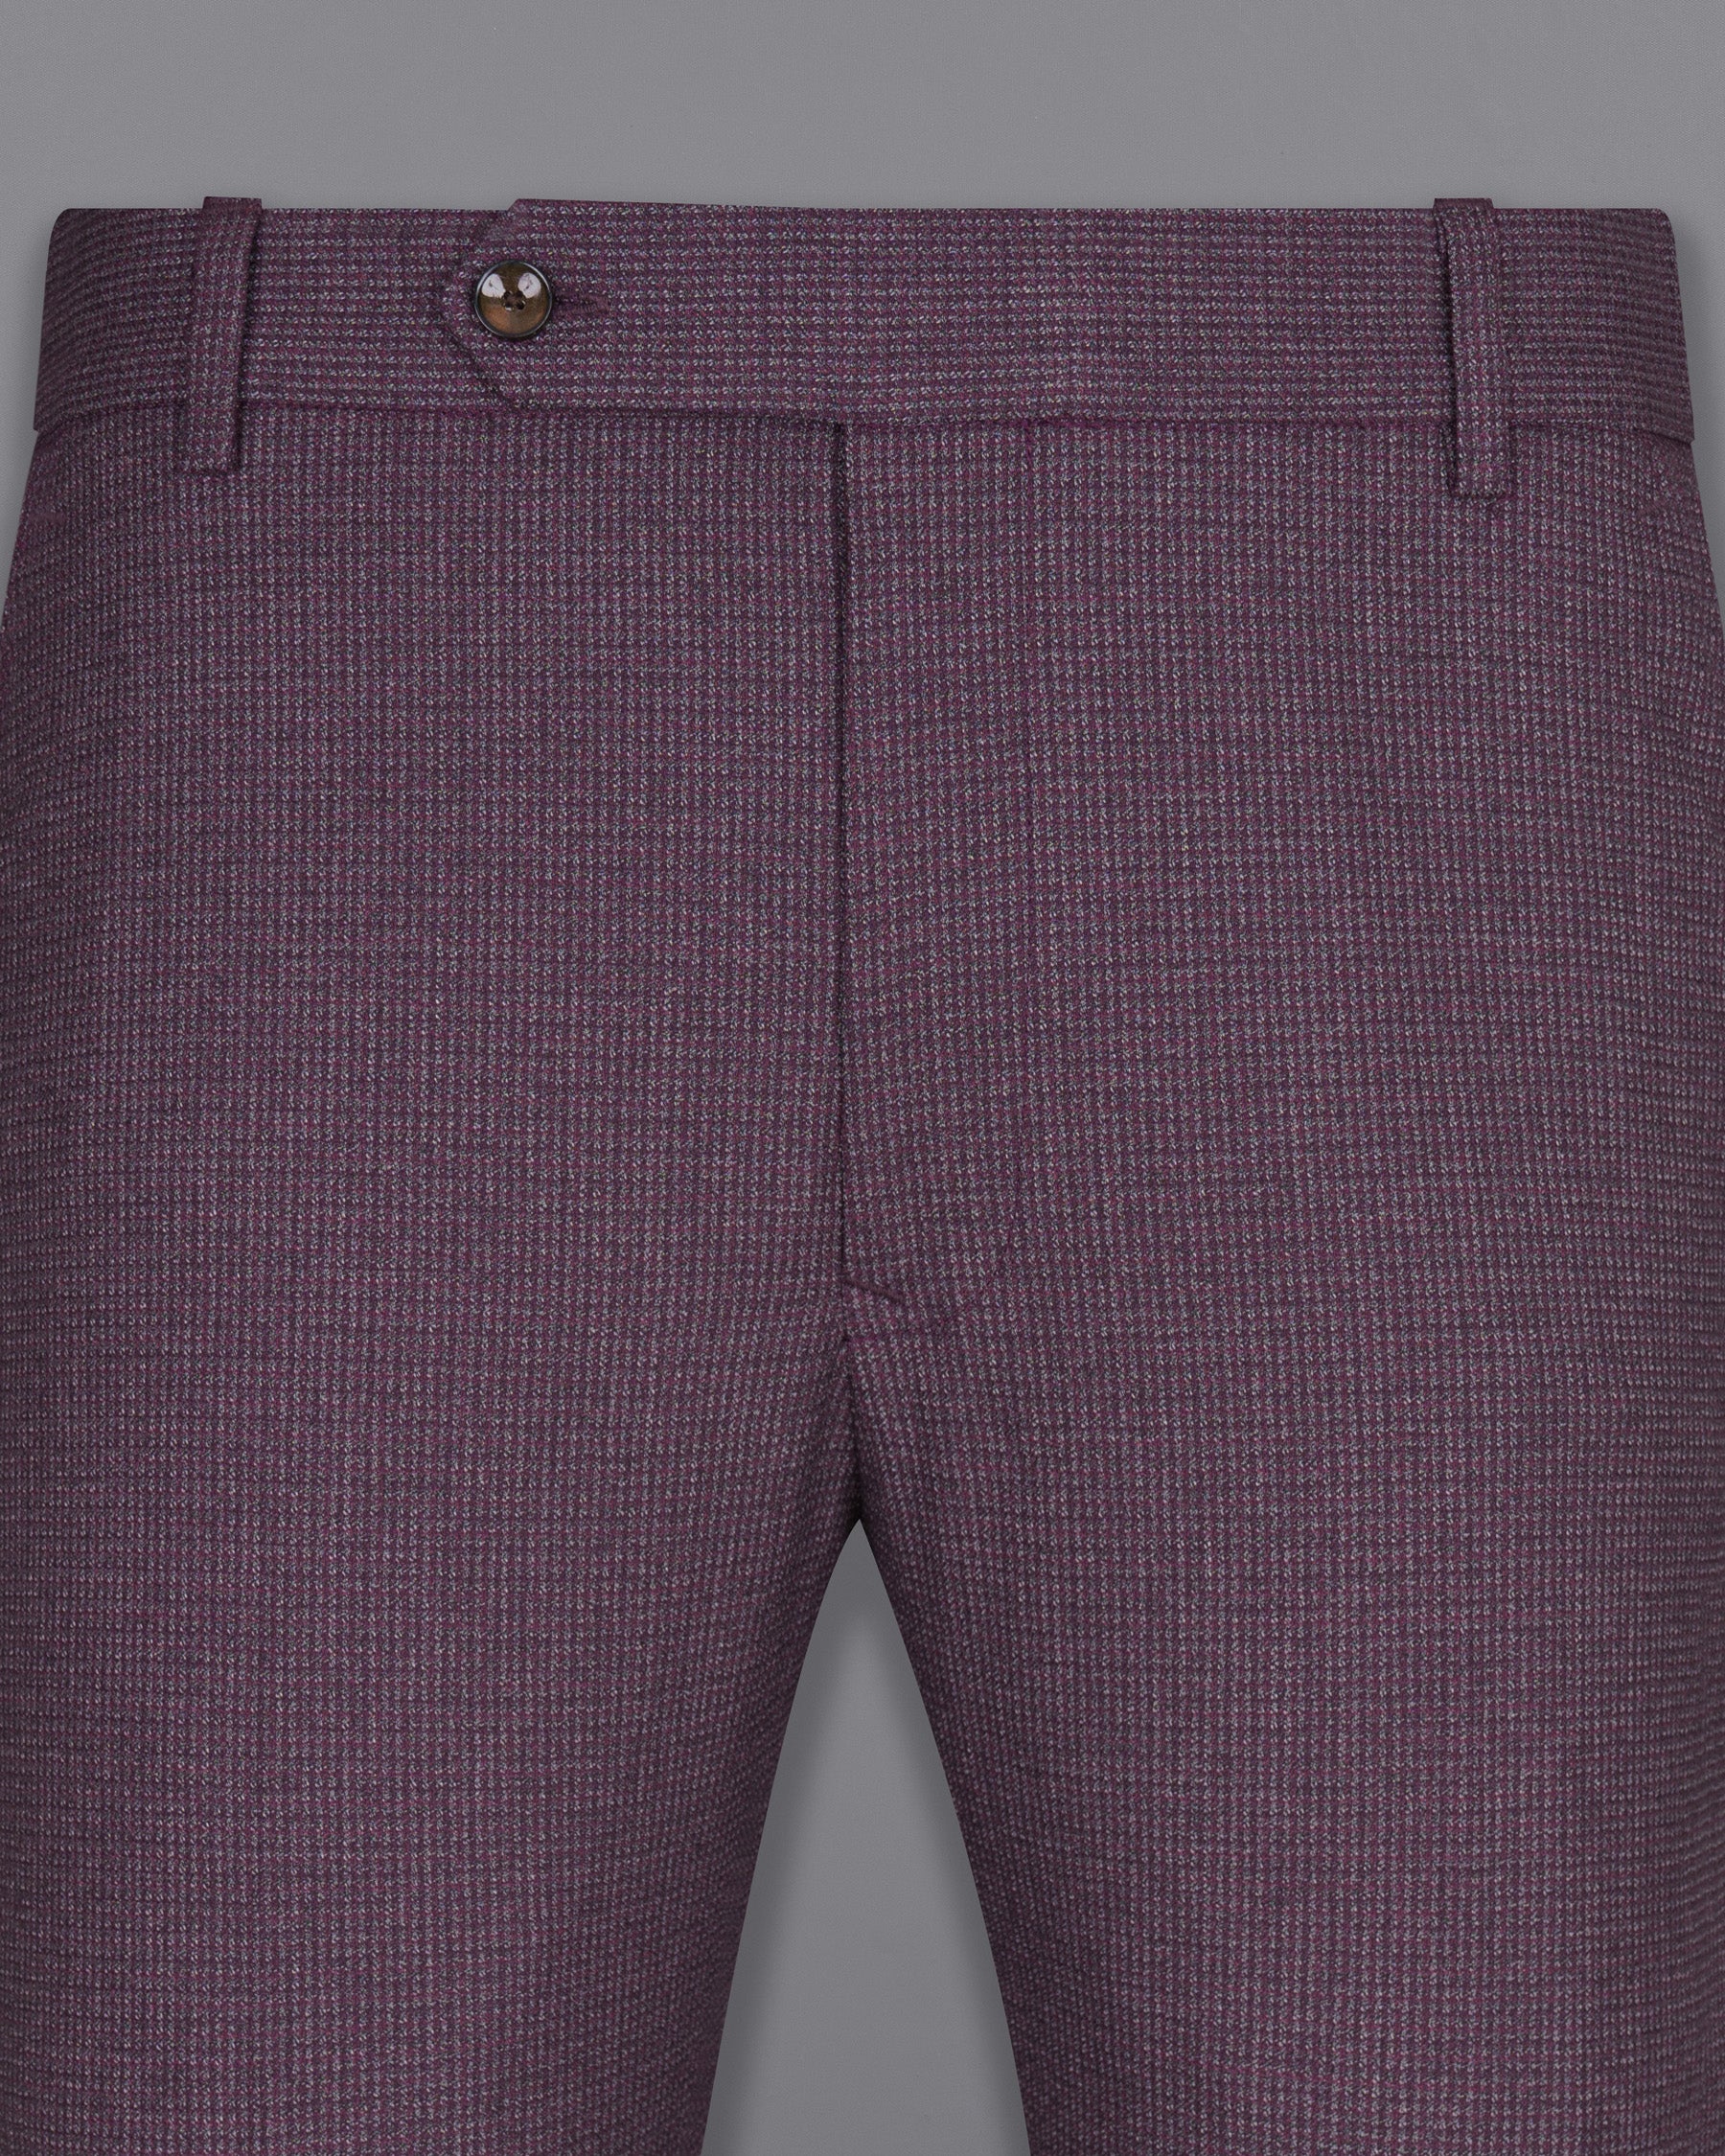 Burgandy with Grey Woolrich Pant